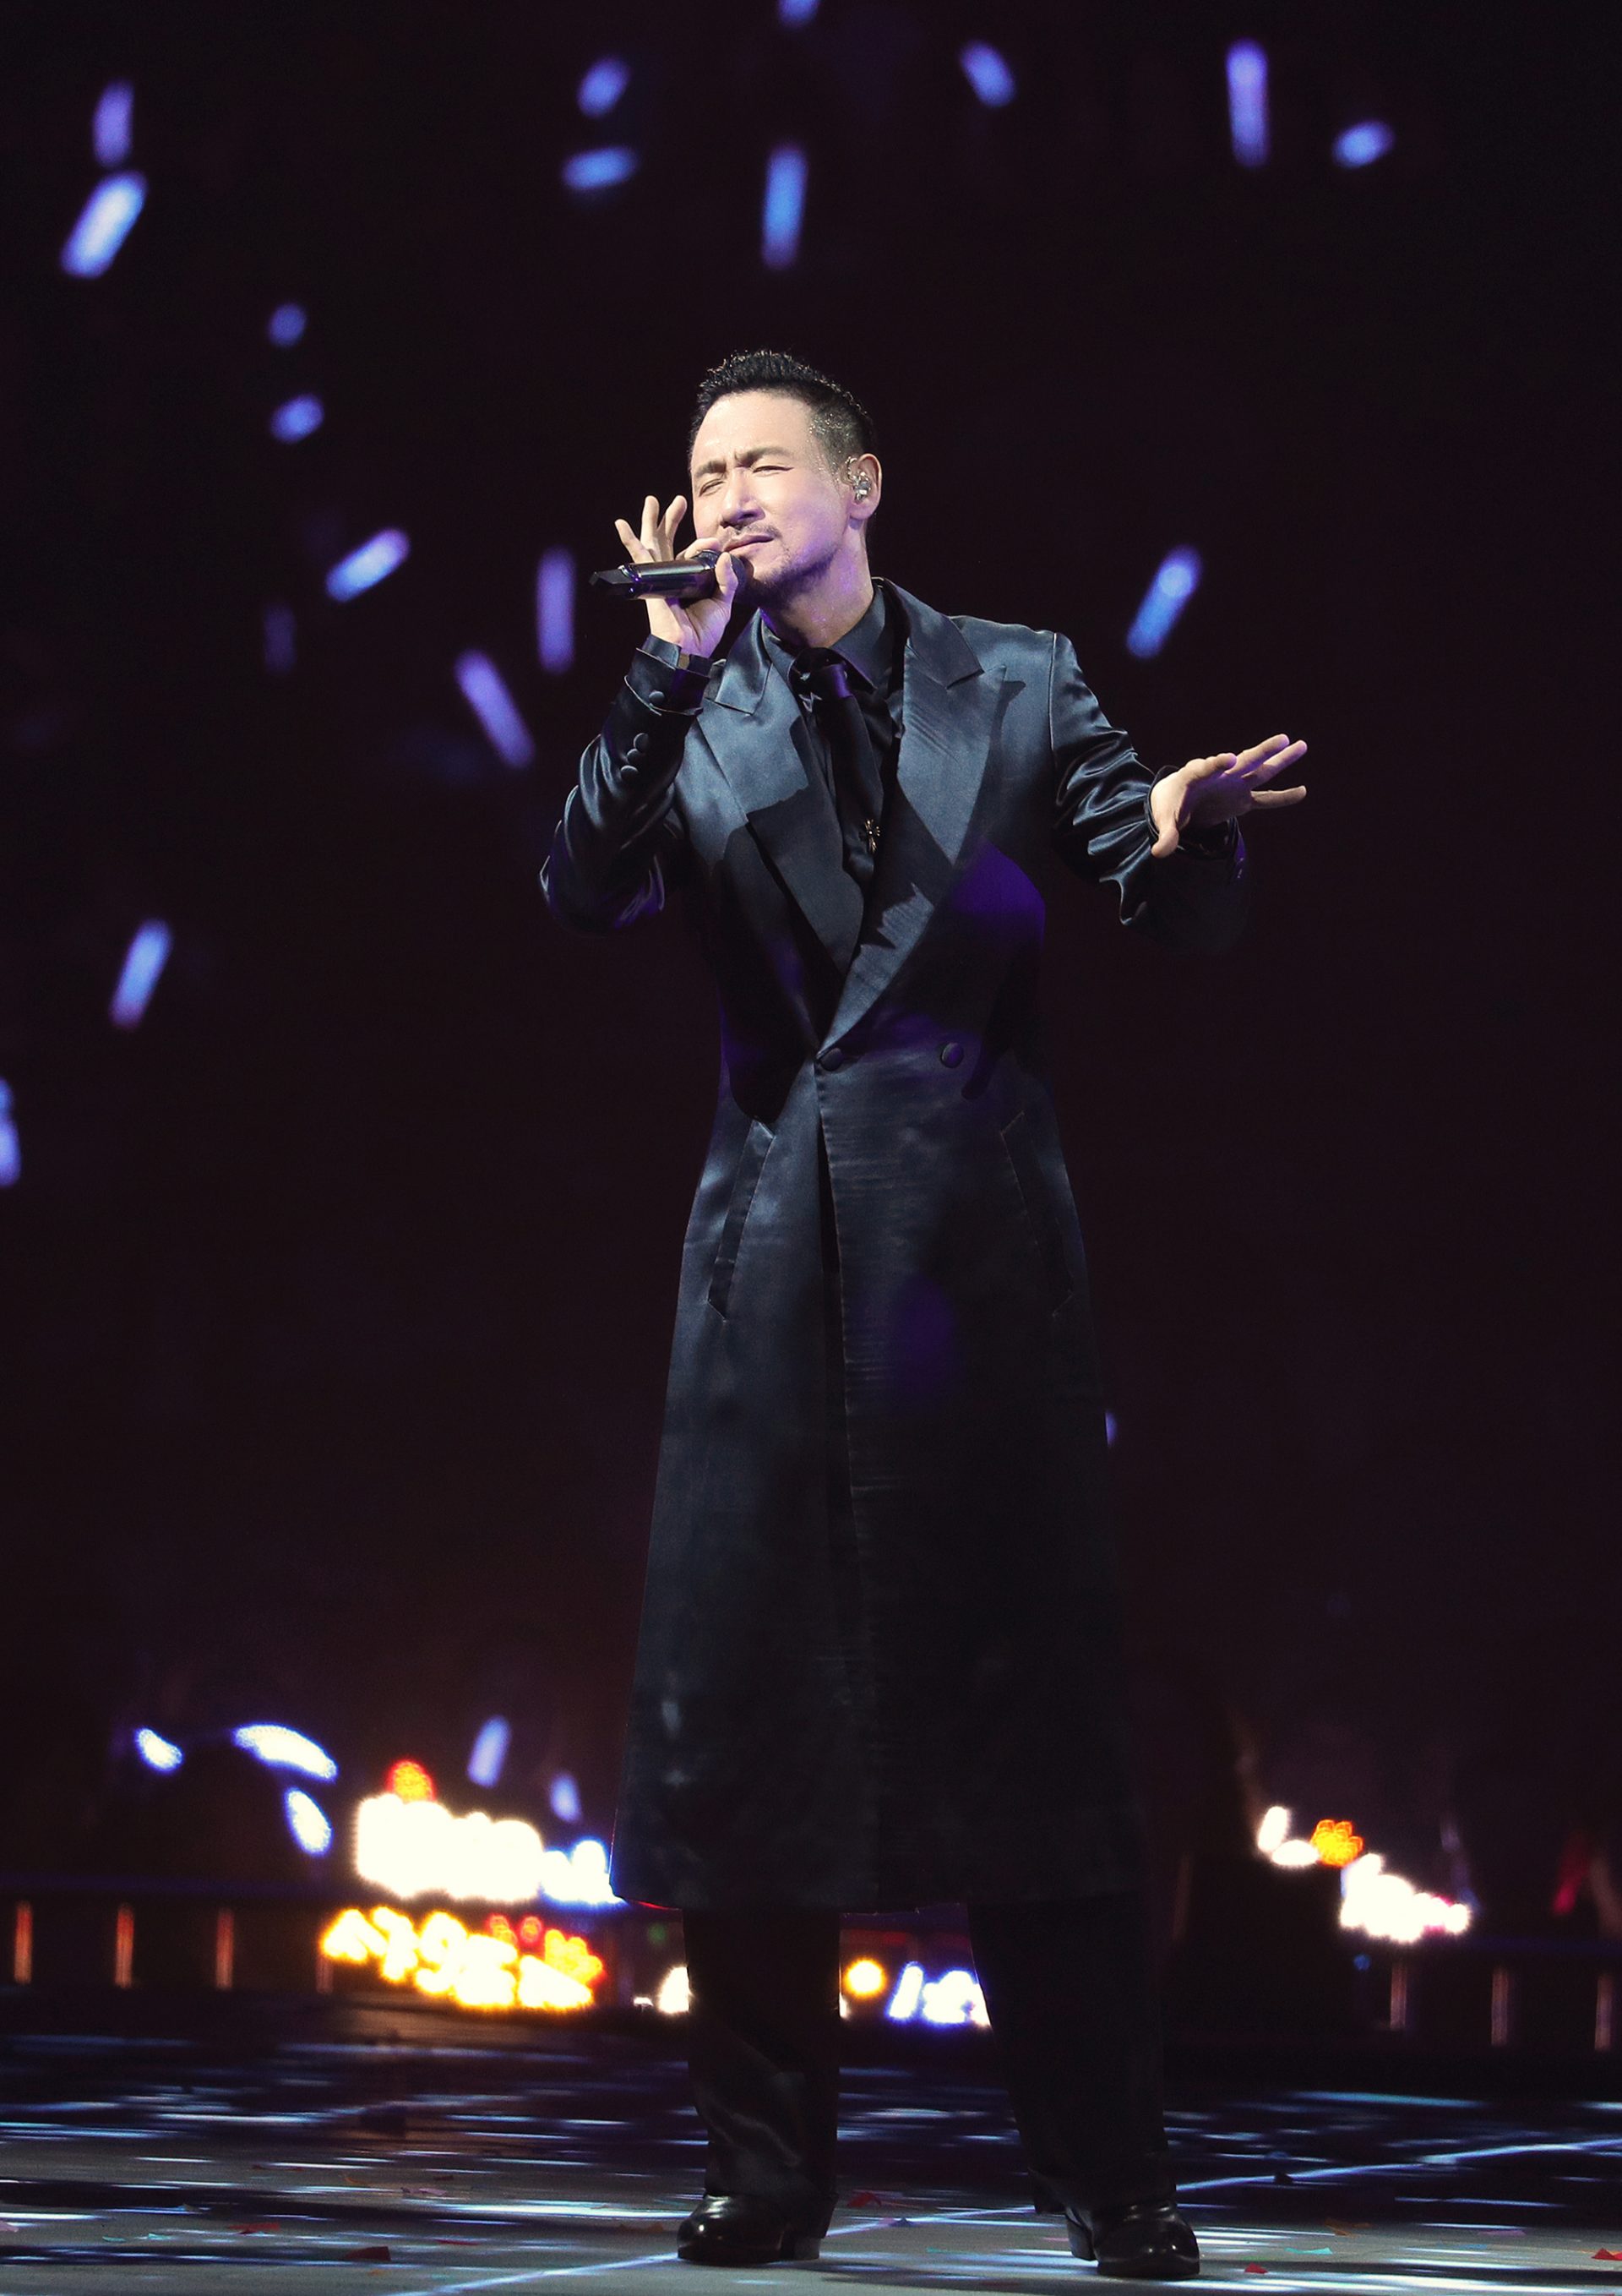 Concert Review: Jacky Cheung Awards M'sian Audiences With 100 Points